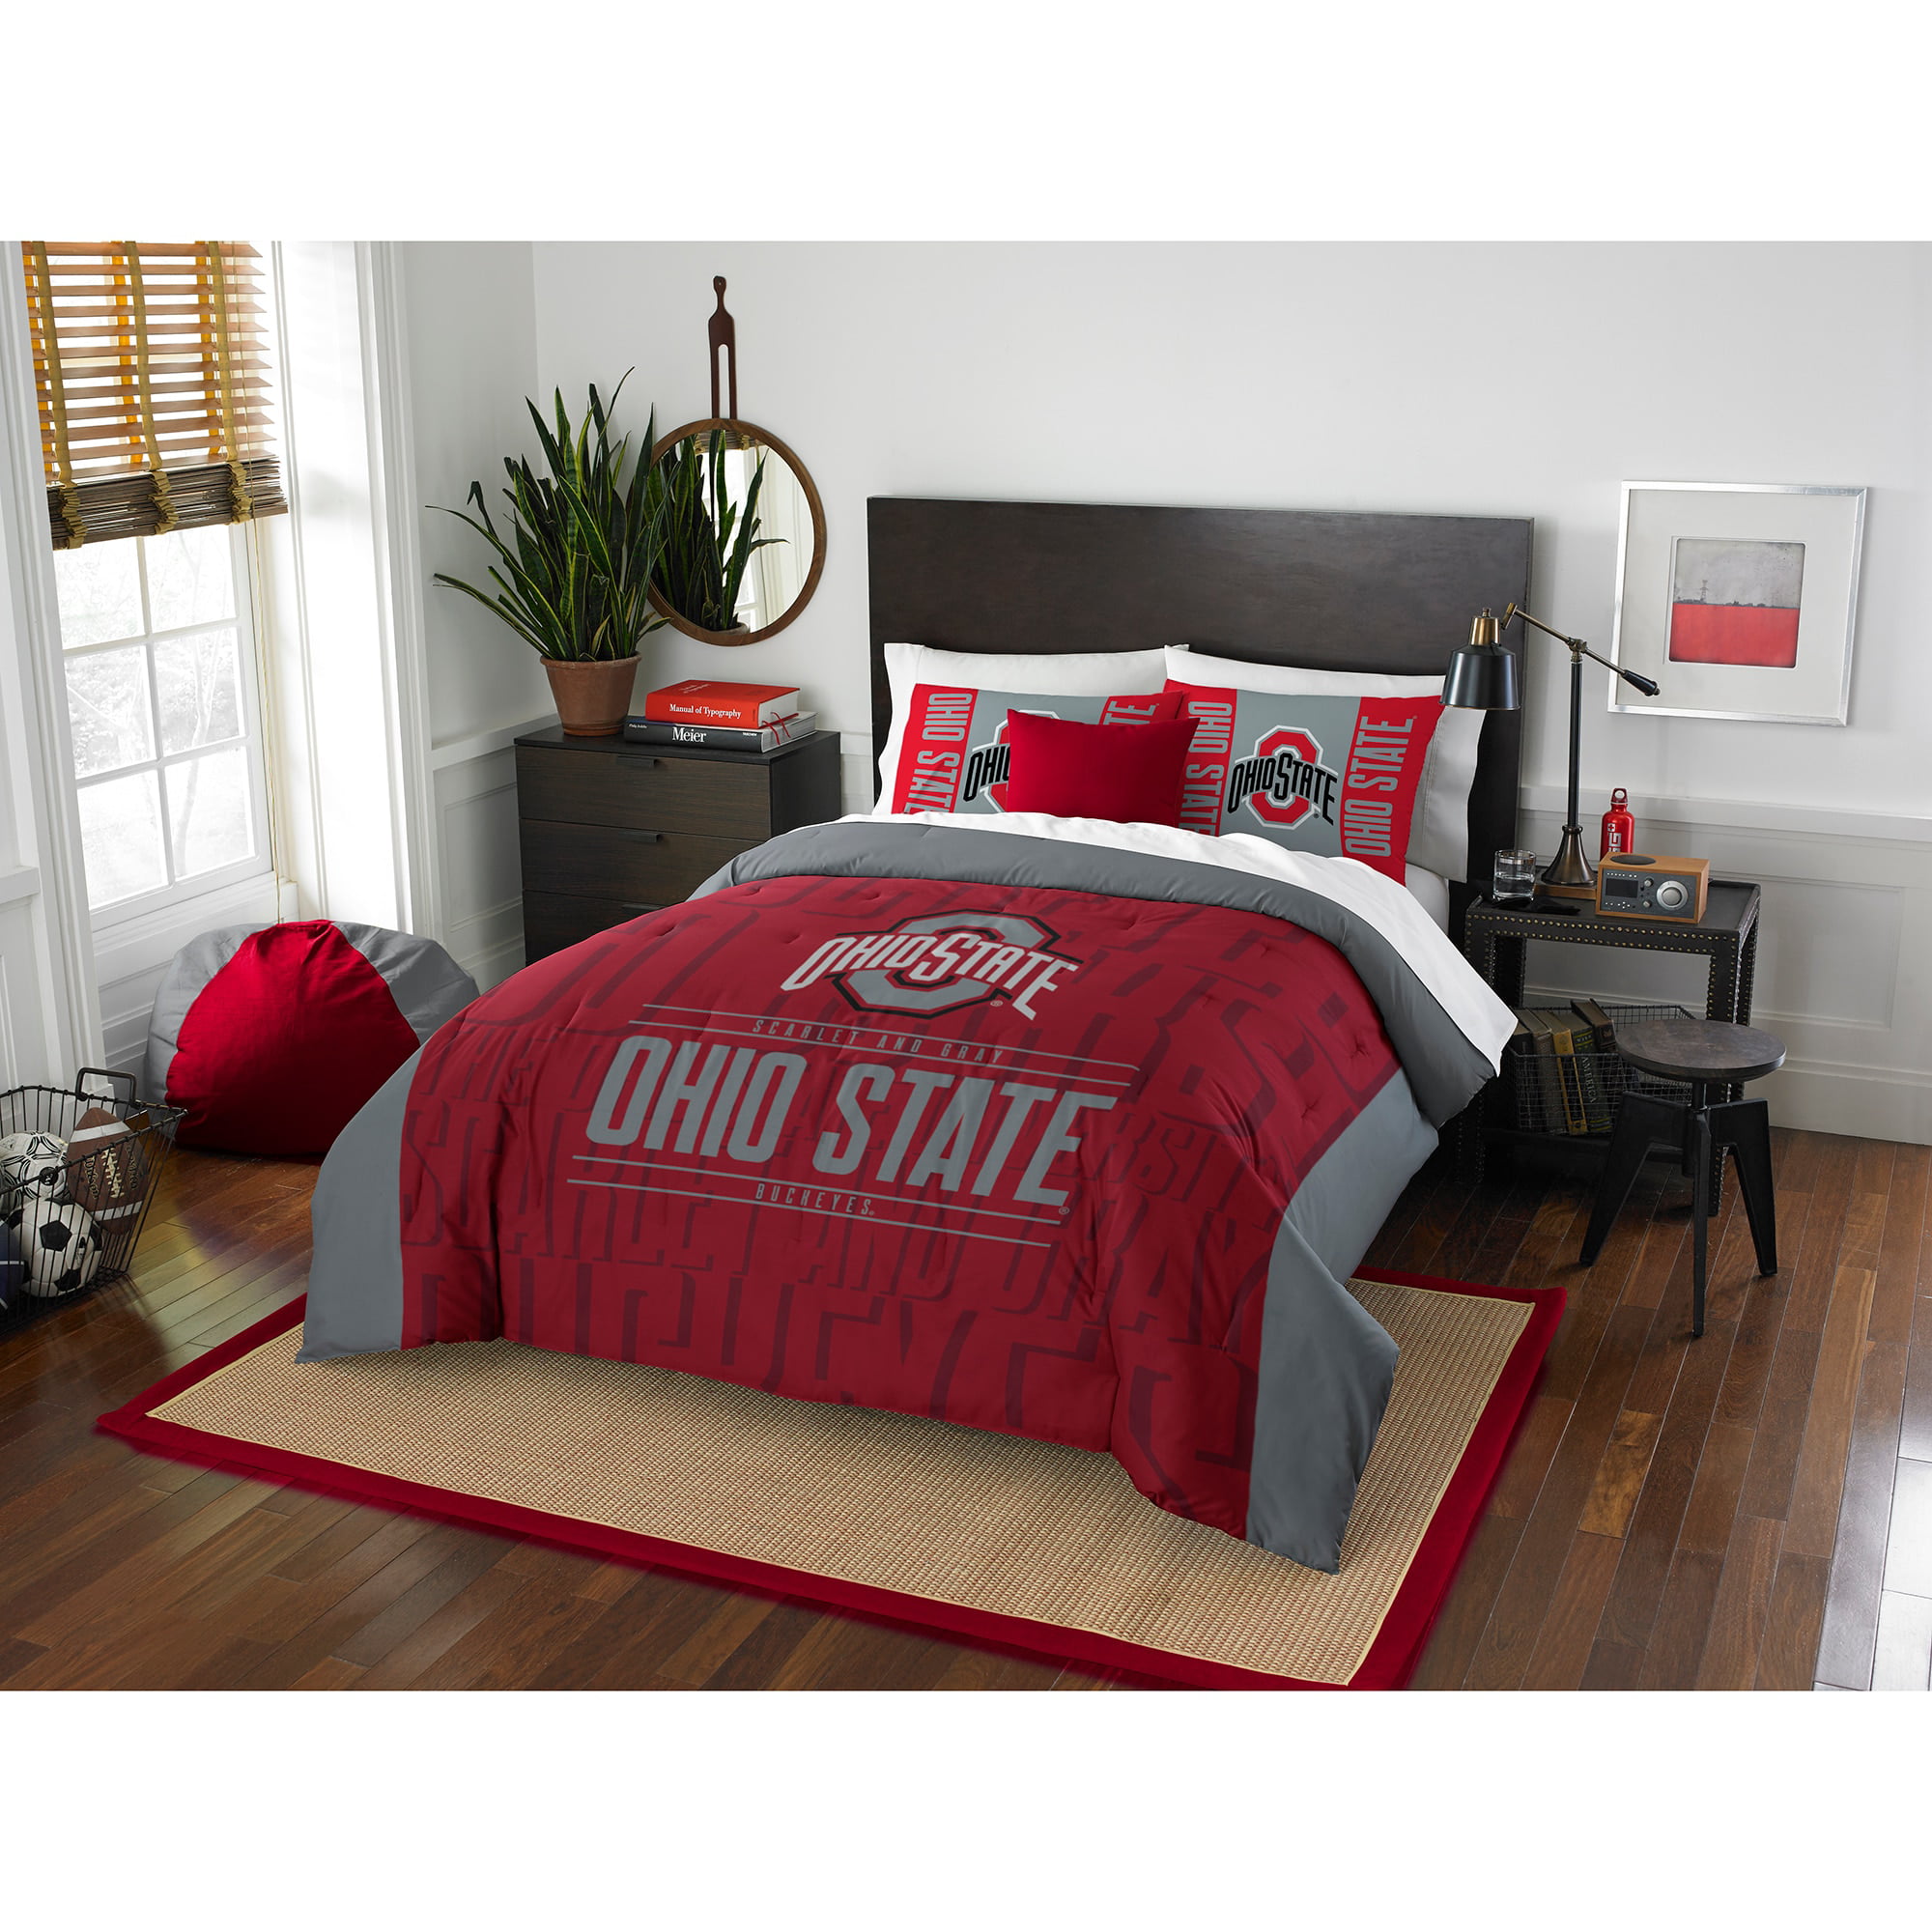 The Northwest Company NCAA Ohio State Buckeyes Affiliation Full/Queen Comforter Set #645950153 